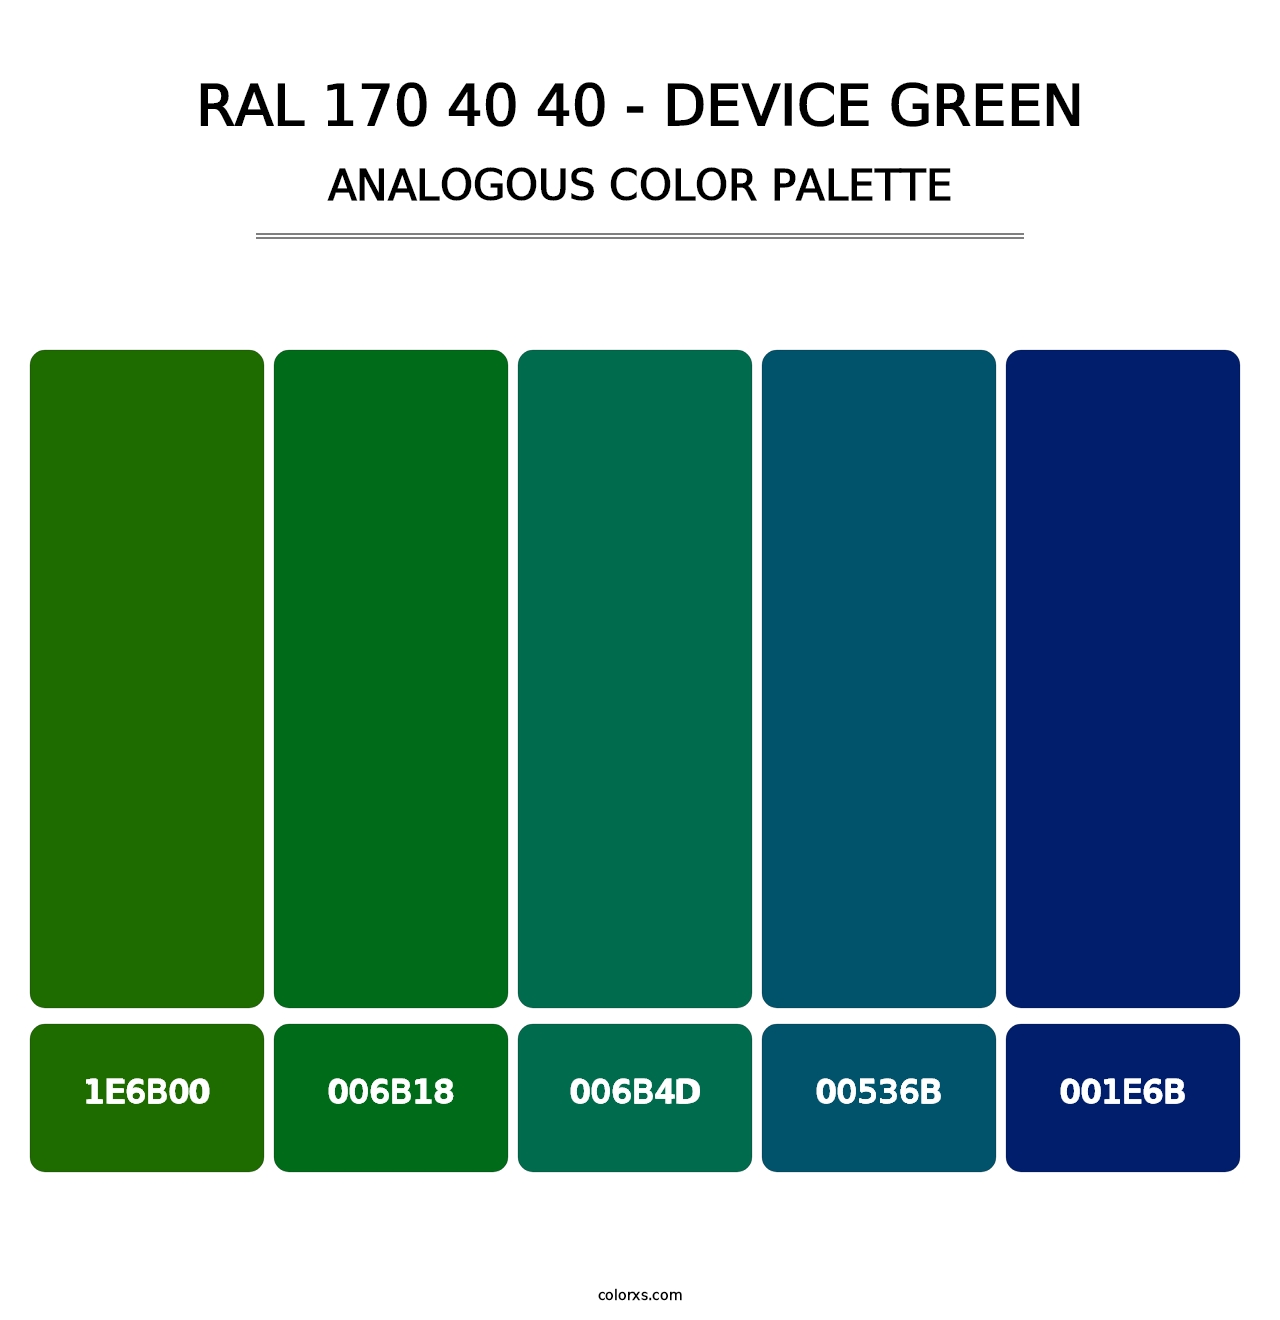 RAL 170 40 40 - Device Green - Analogous Color Palette